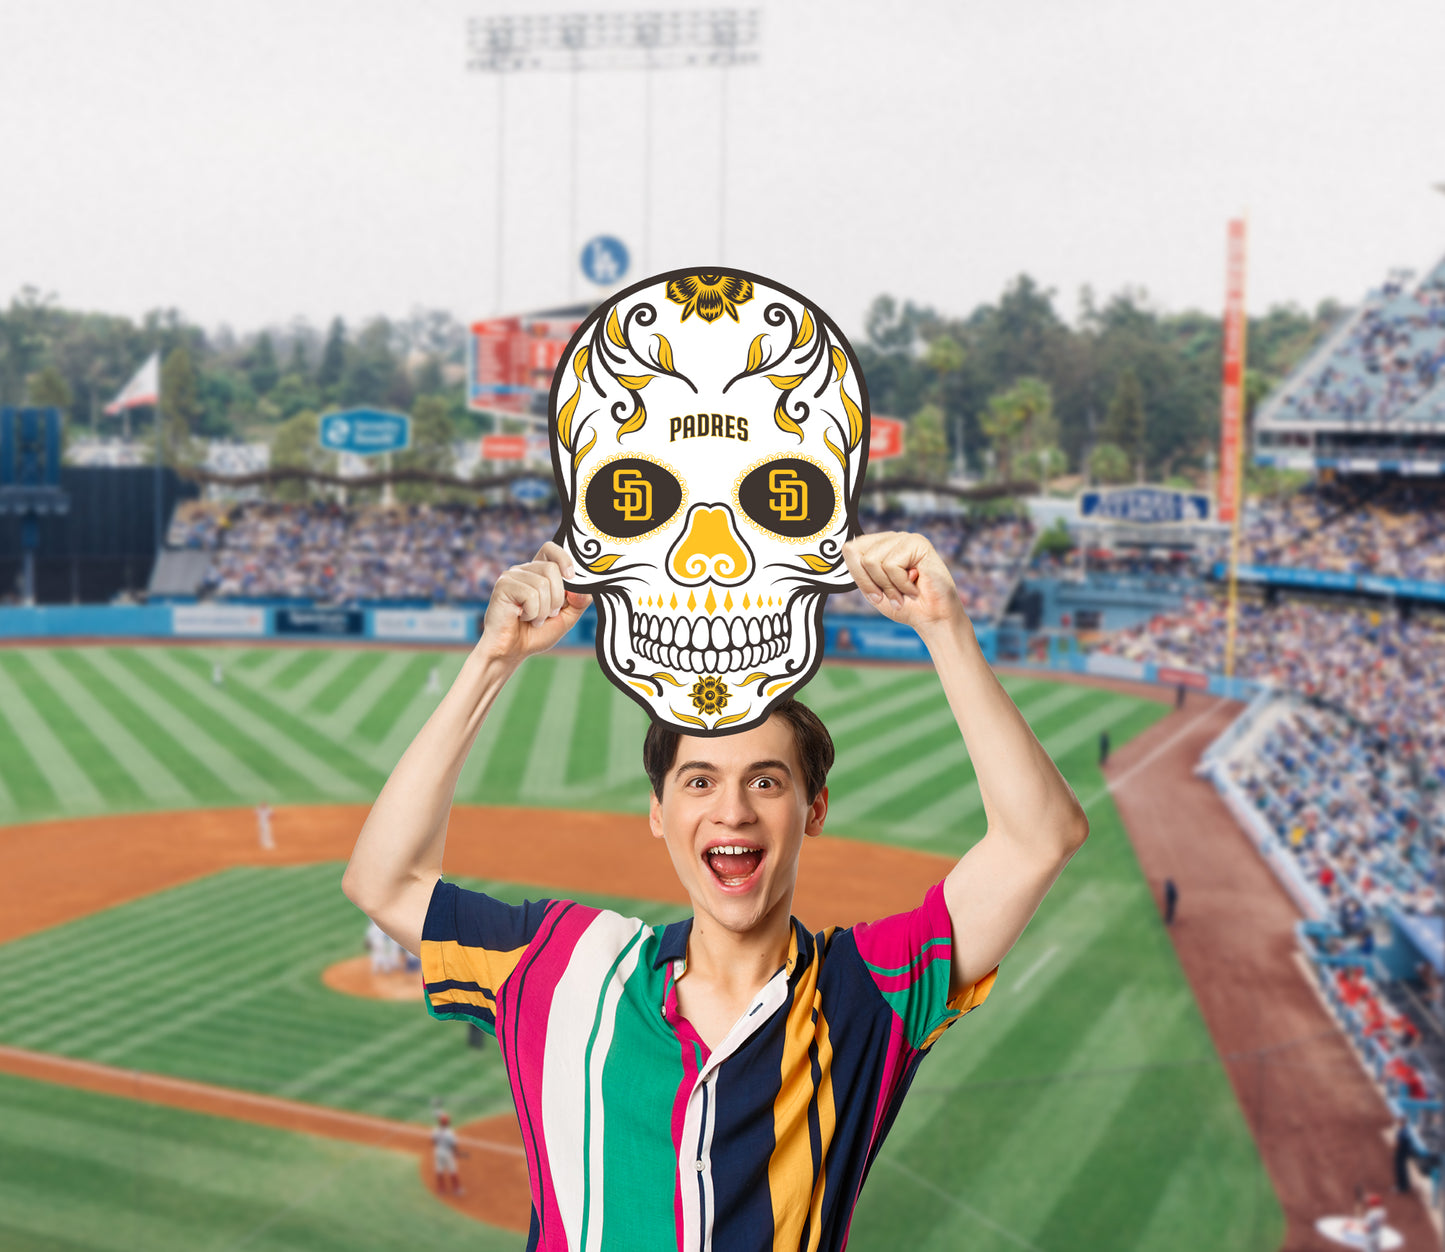 San Diego Padres: Skull Foam Core Cutout - Officially Licensed MLB Big Head